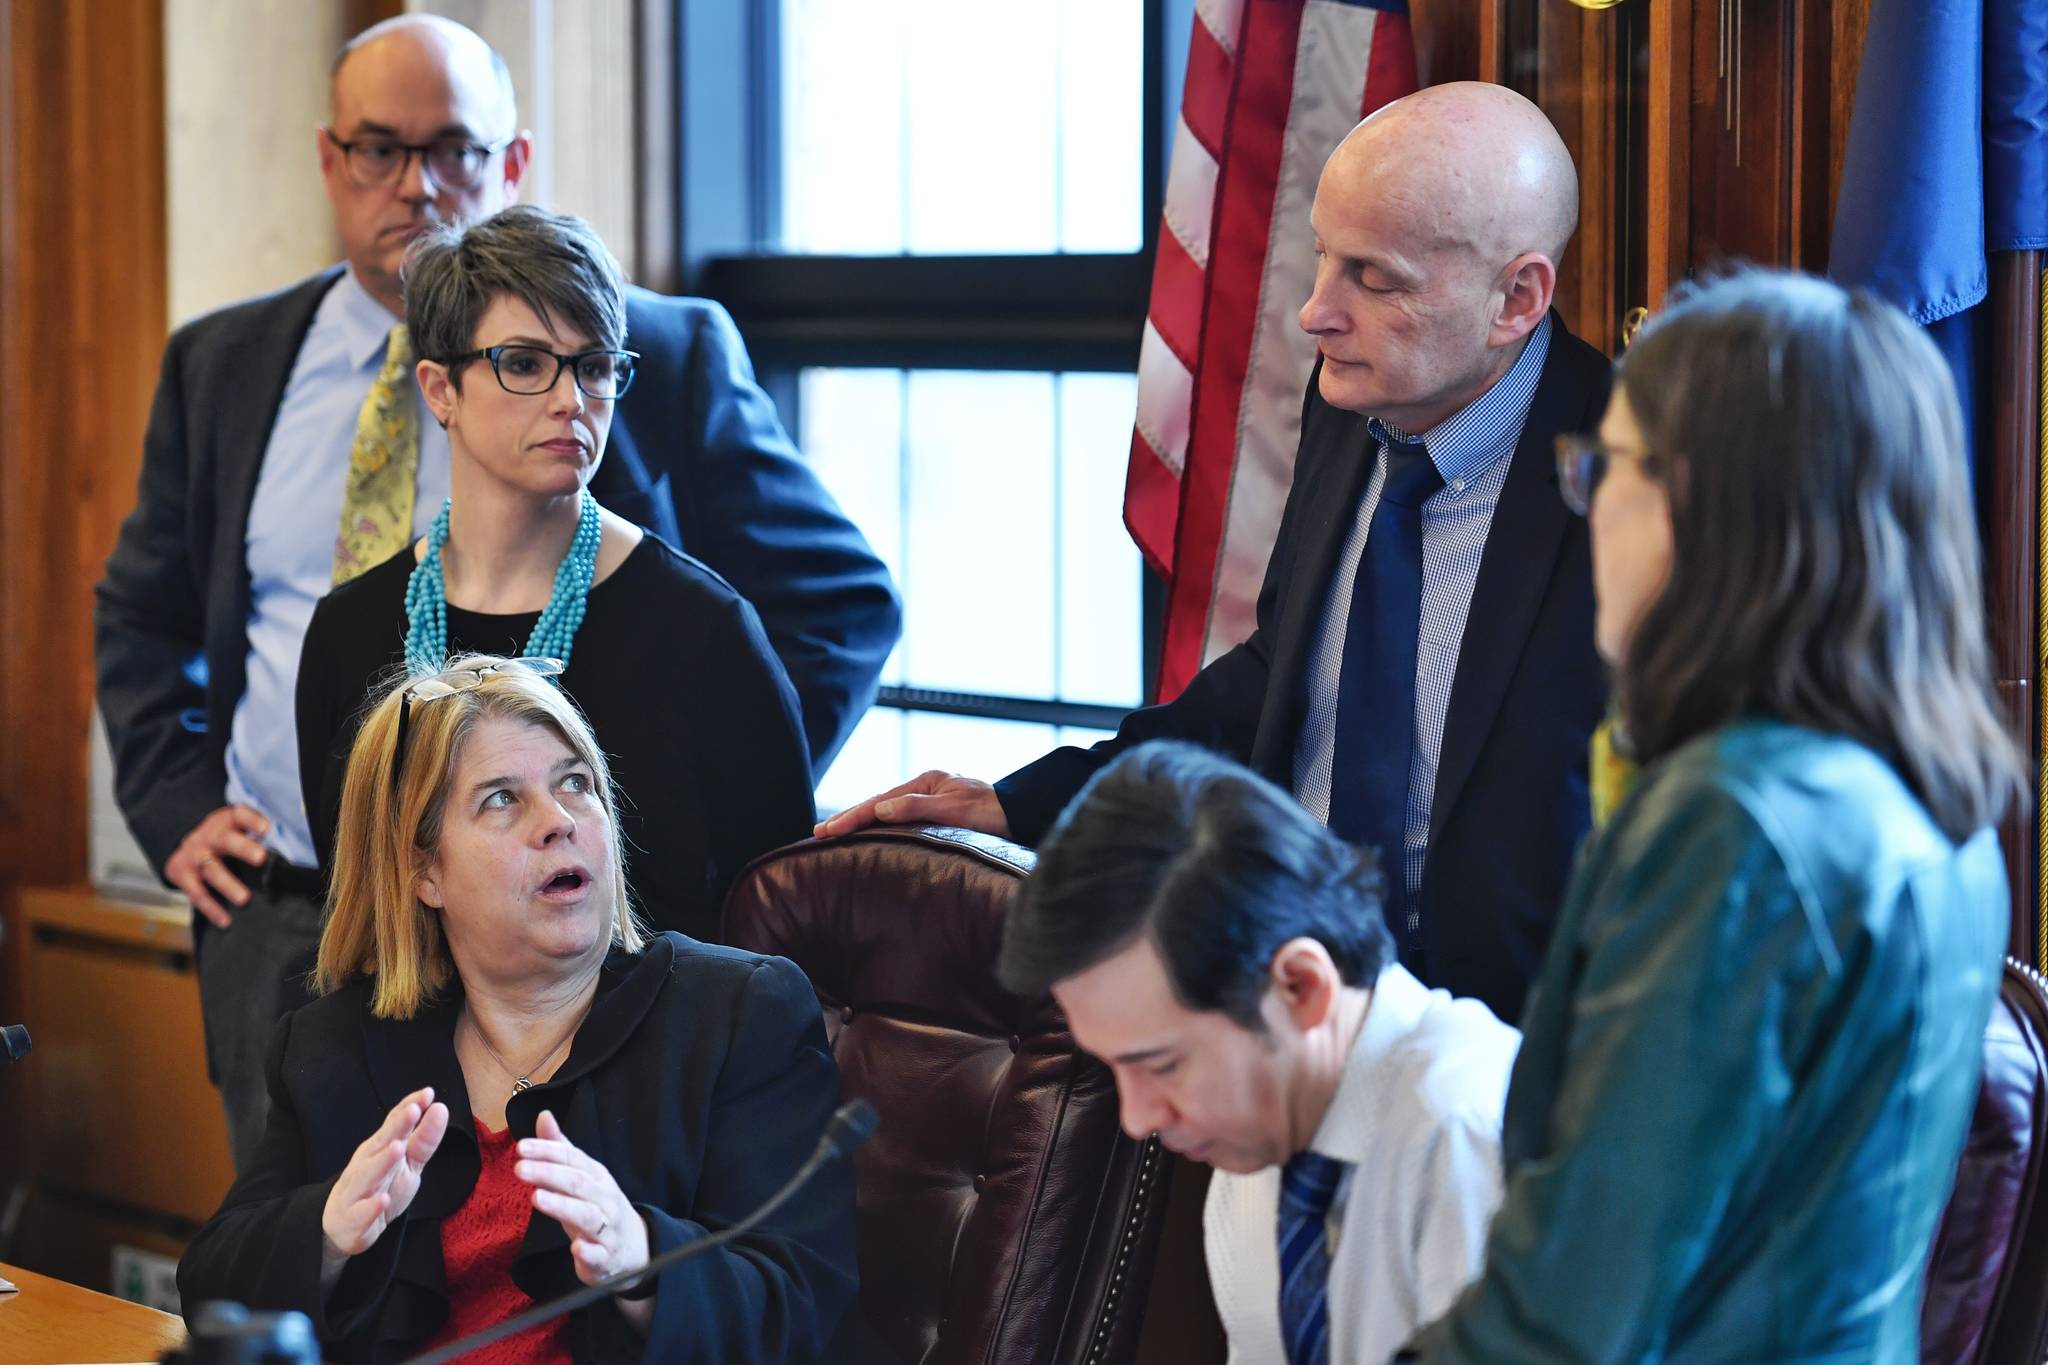 House Finance Committee members talk about an amendment to repeal the Ocean Ranger program during a committee meeting at the Capitol on Thursday, April 4, 2019. The Ocean Ranger program was approved through a voter ballot initiative in 2006. From left: Rep. Andy Josephson, D-Anchorage, Rep. Kelly Merrick, R-Eagle River, Co-Chair Tammie Wilson, R-North Pole, Co-Chair Neal Foster, D-Nome, Rep. Dan Ortiz, I-Ketchikan, and Rep. Jennifer Johnston, R-Anchorage. The amendment passed 8-3. (Michael Penn | Juneau Empire)